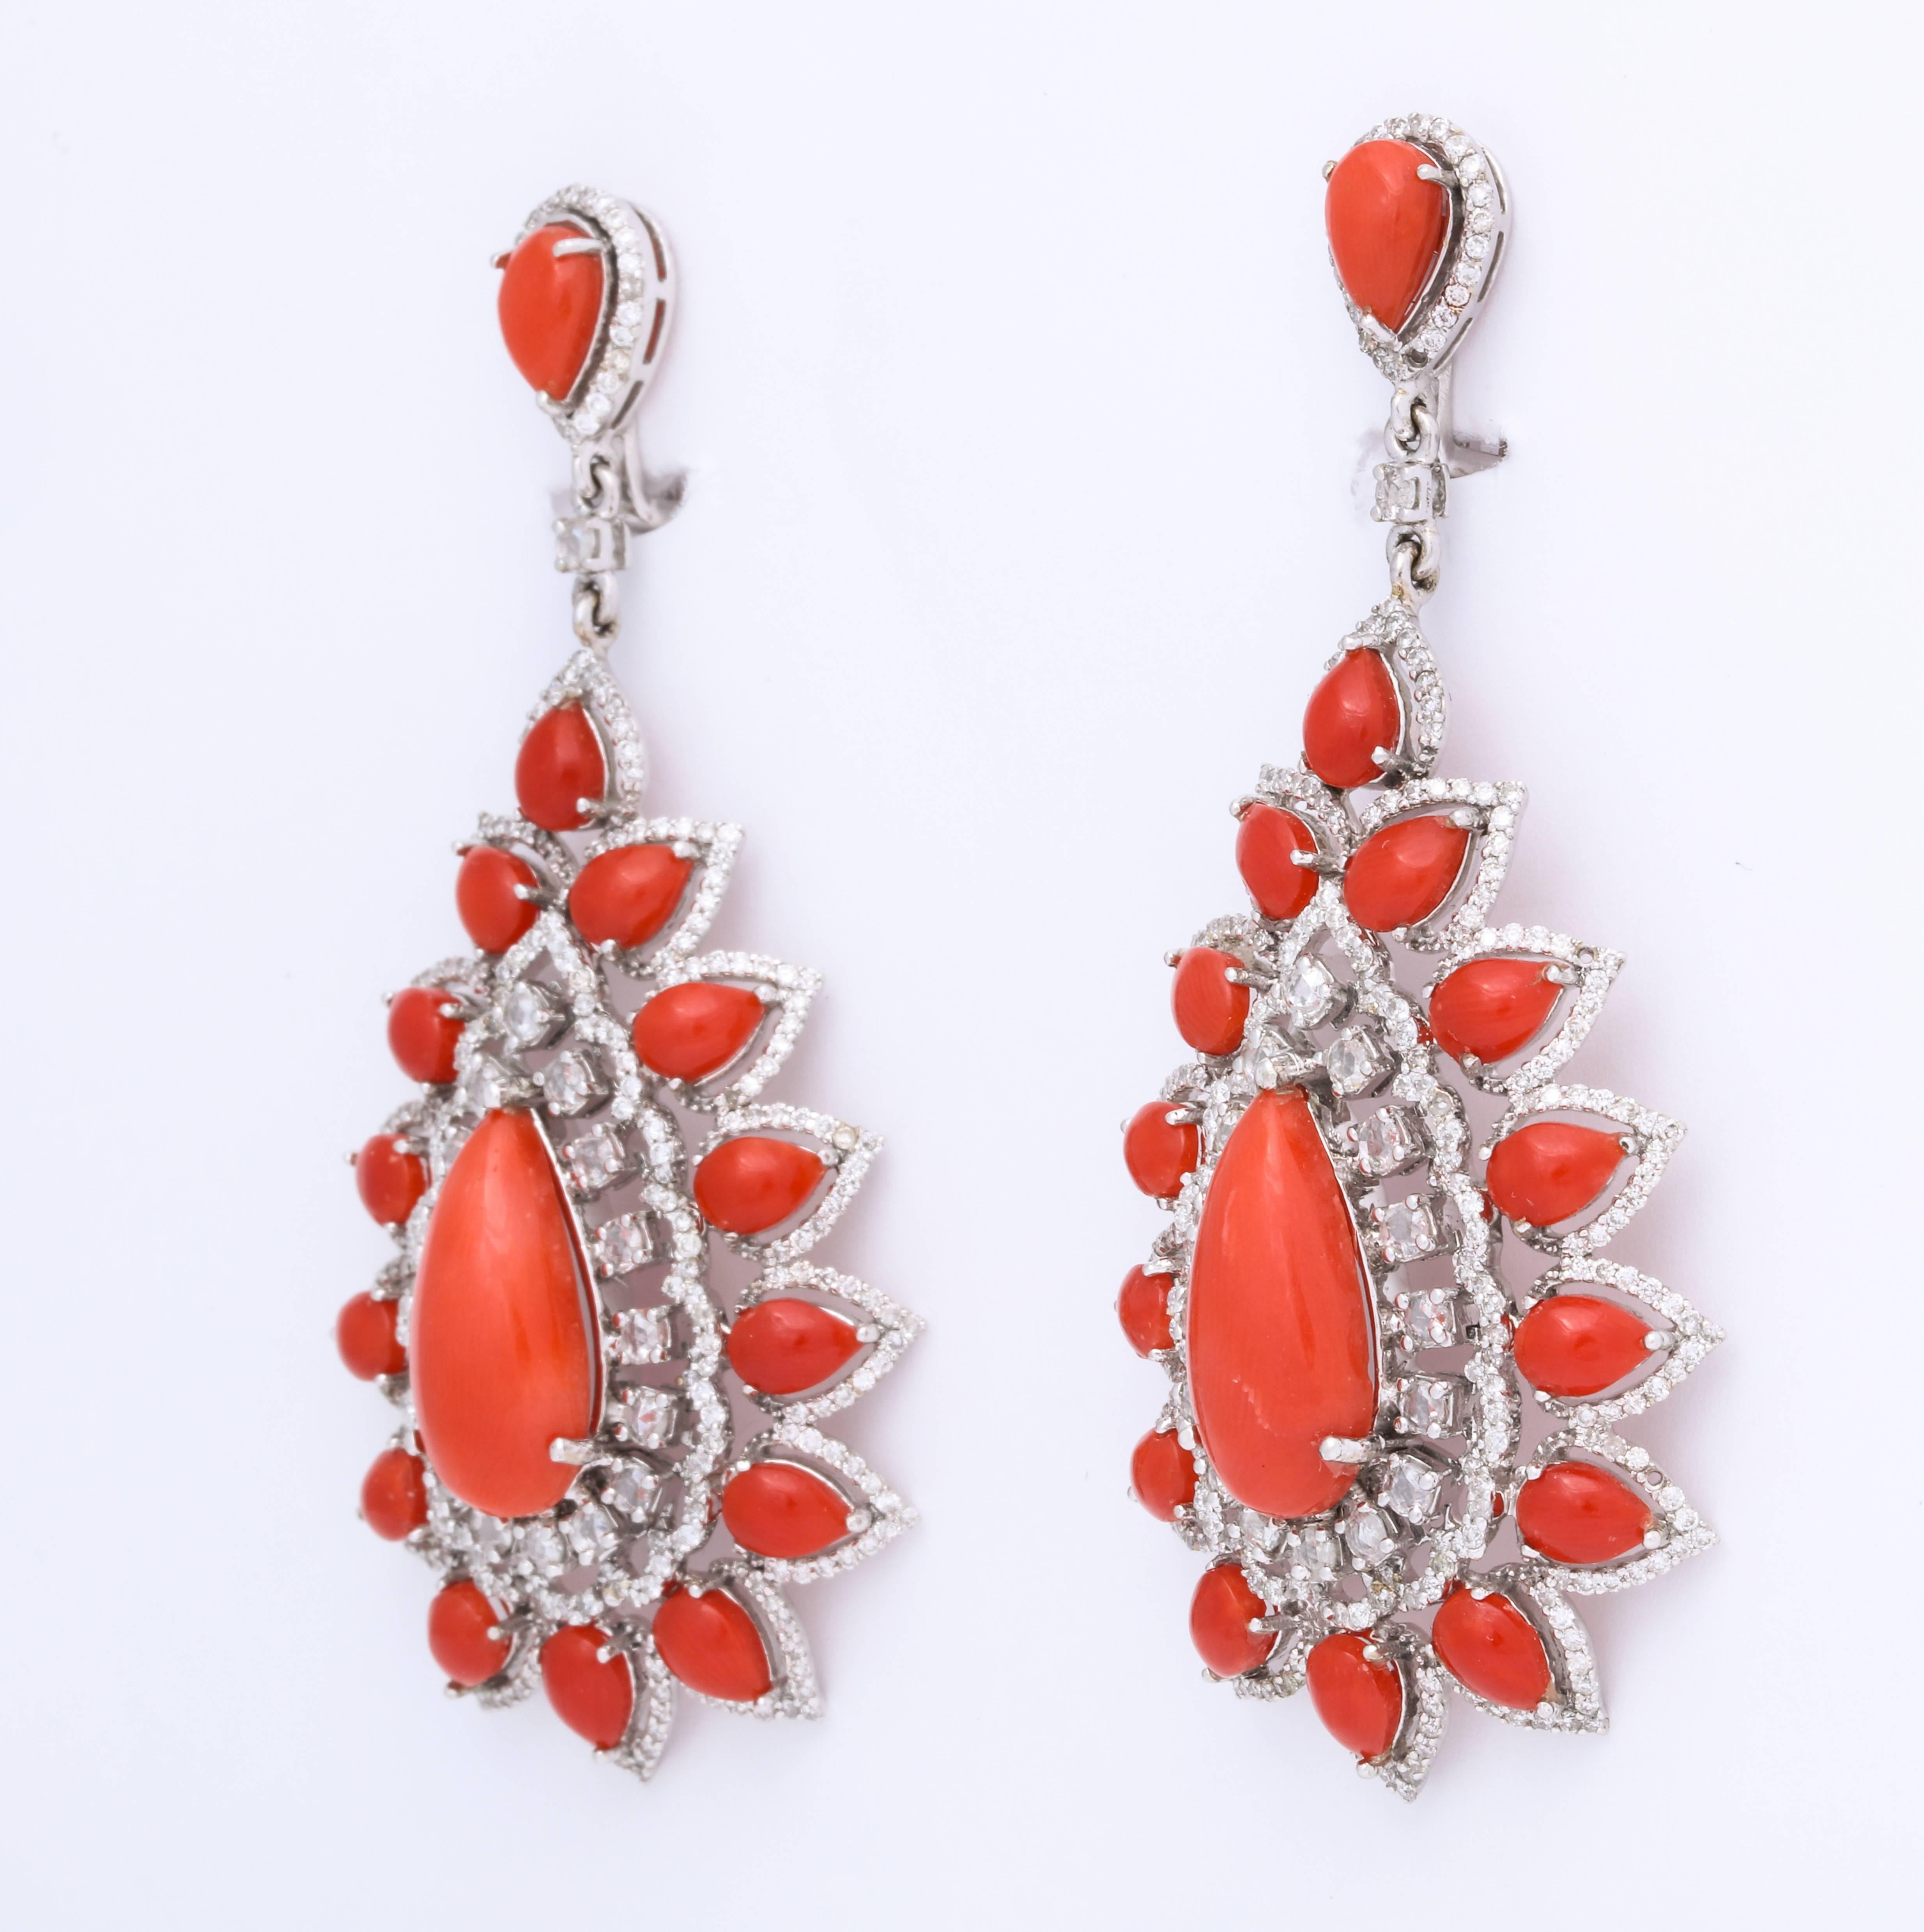 18kt white gold, coral and diamond (4.49cts) earrings.  Perfectly matched, bright orange coral pear shape cabochons are each surrounded by diamonds.  The delicate setting makes these earrings appear to float just below the ear.